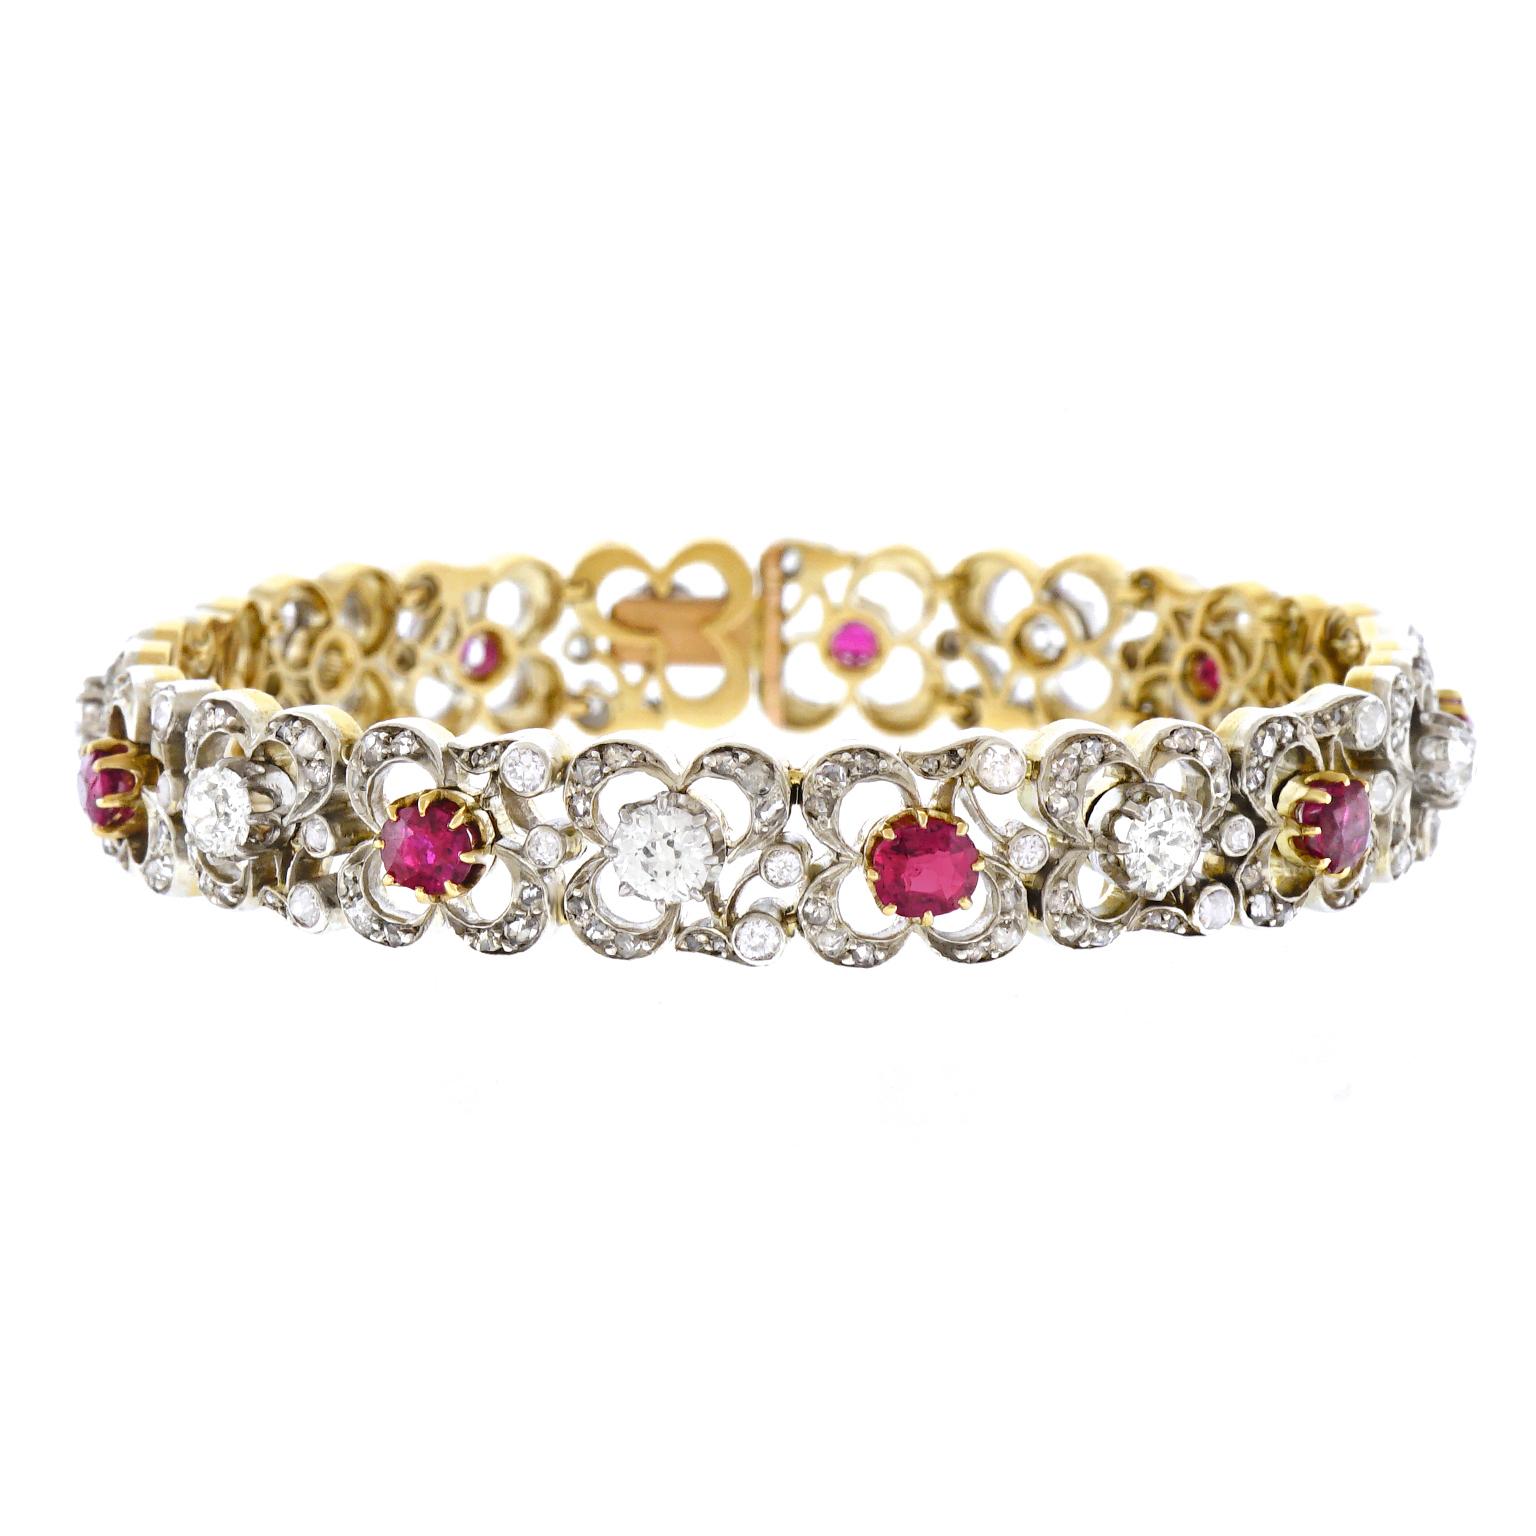 Antique Silver over Gold Diamond and Ruby Bracelet